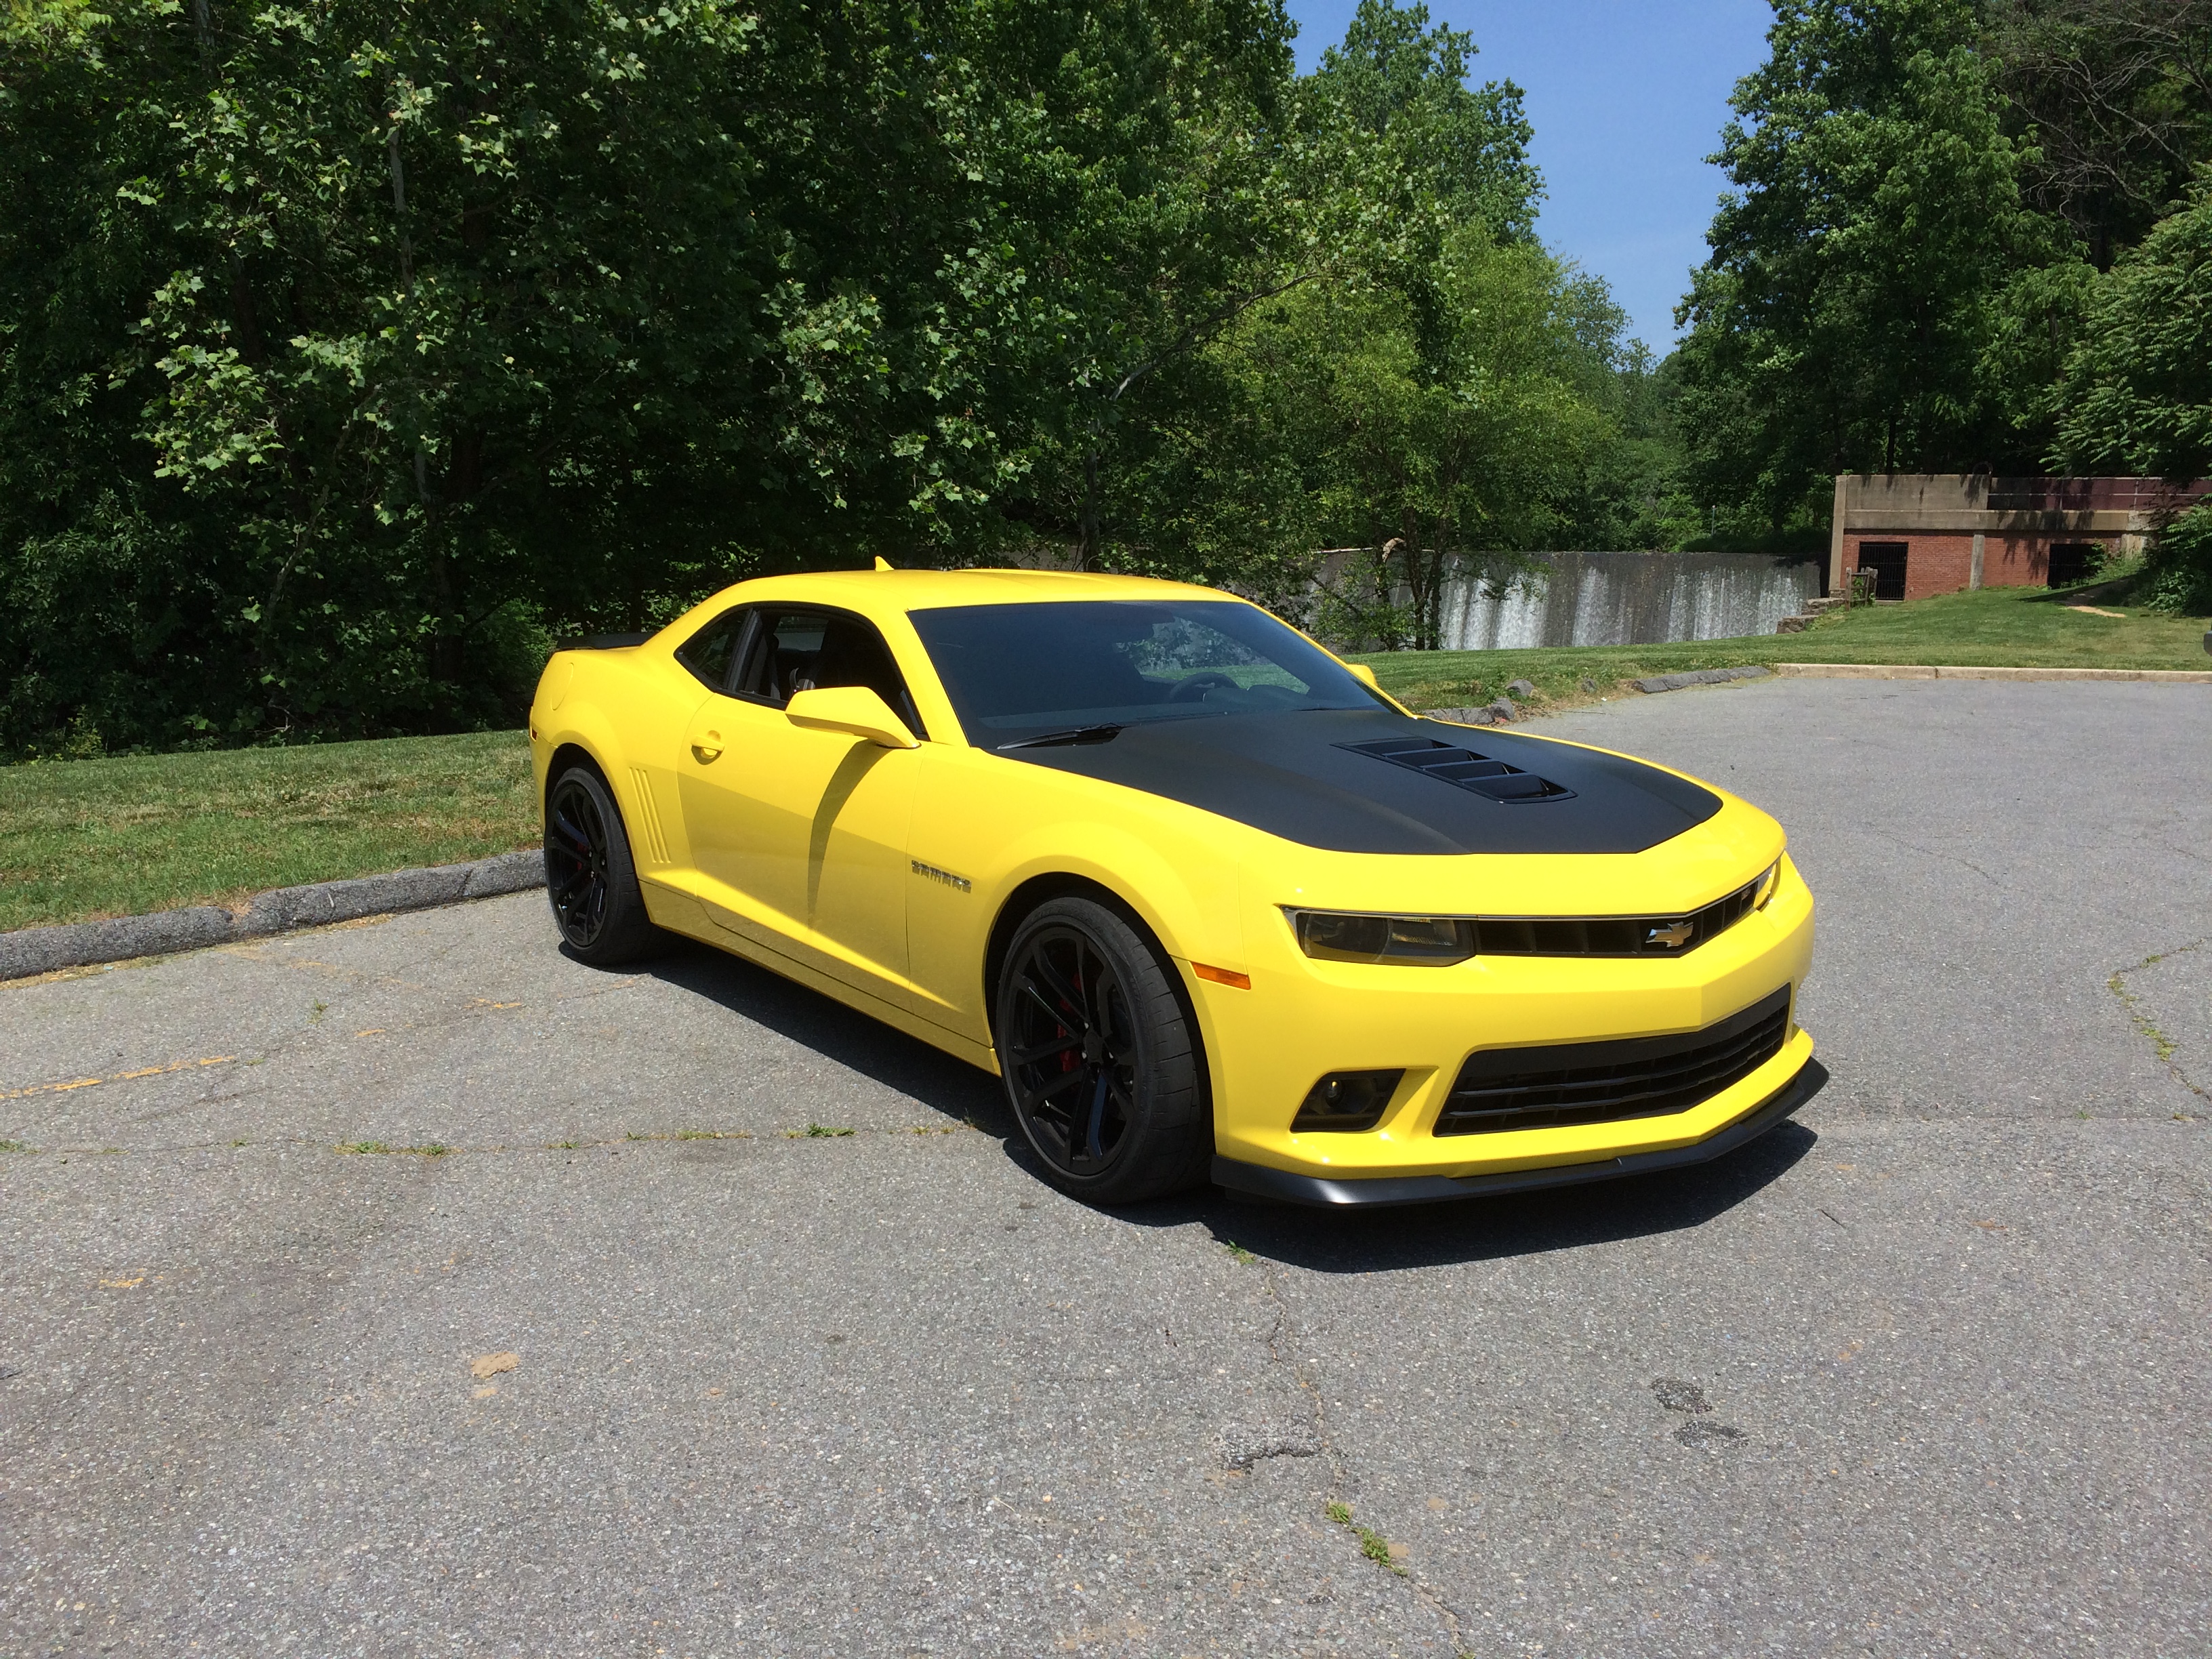 2015 Chevrolet Camaro 2SS goes from muscle car to track star